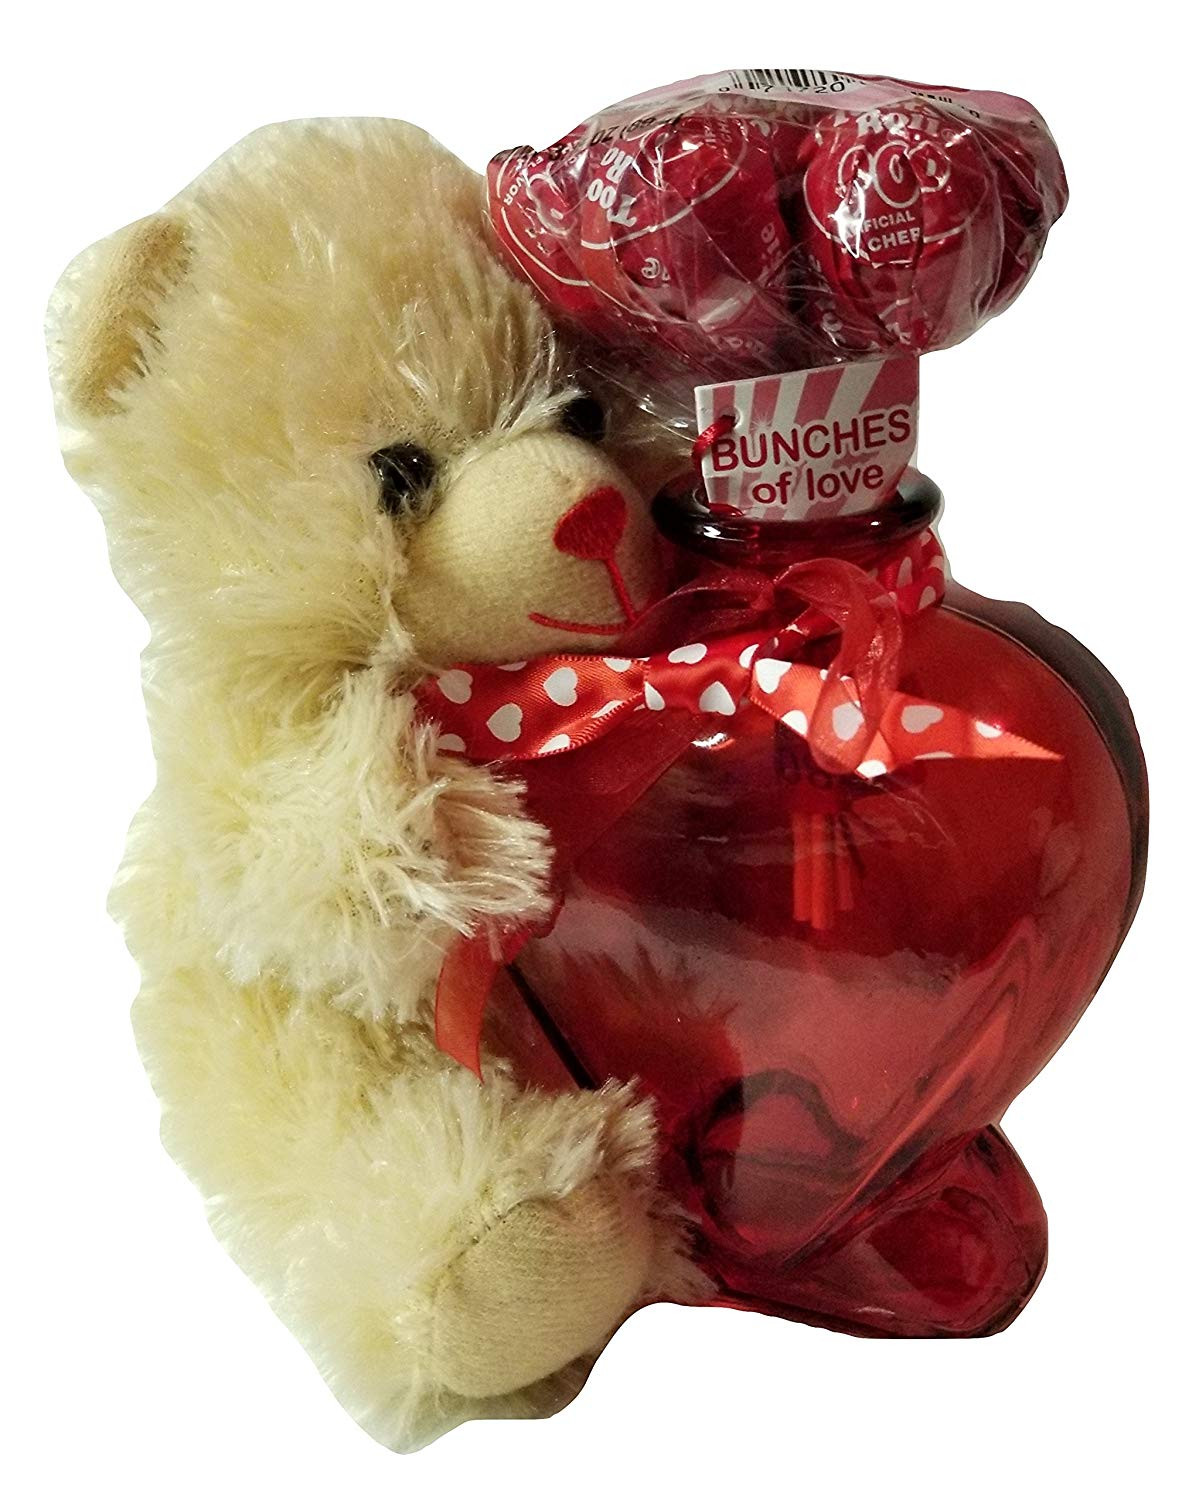 19 Fashionable Red Glass Heart Shaped Vase 2024 free download red glass heart shaped vase of cheap chocolate plush find chocolate plush deals on line at alibaba com inside get quotations ac2b7 heart shaped red glass vases chocolate scented plush sittin